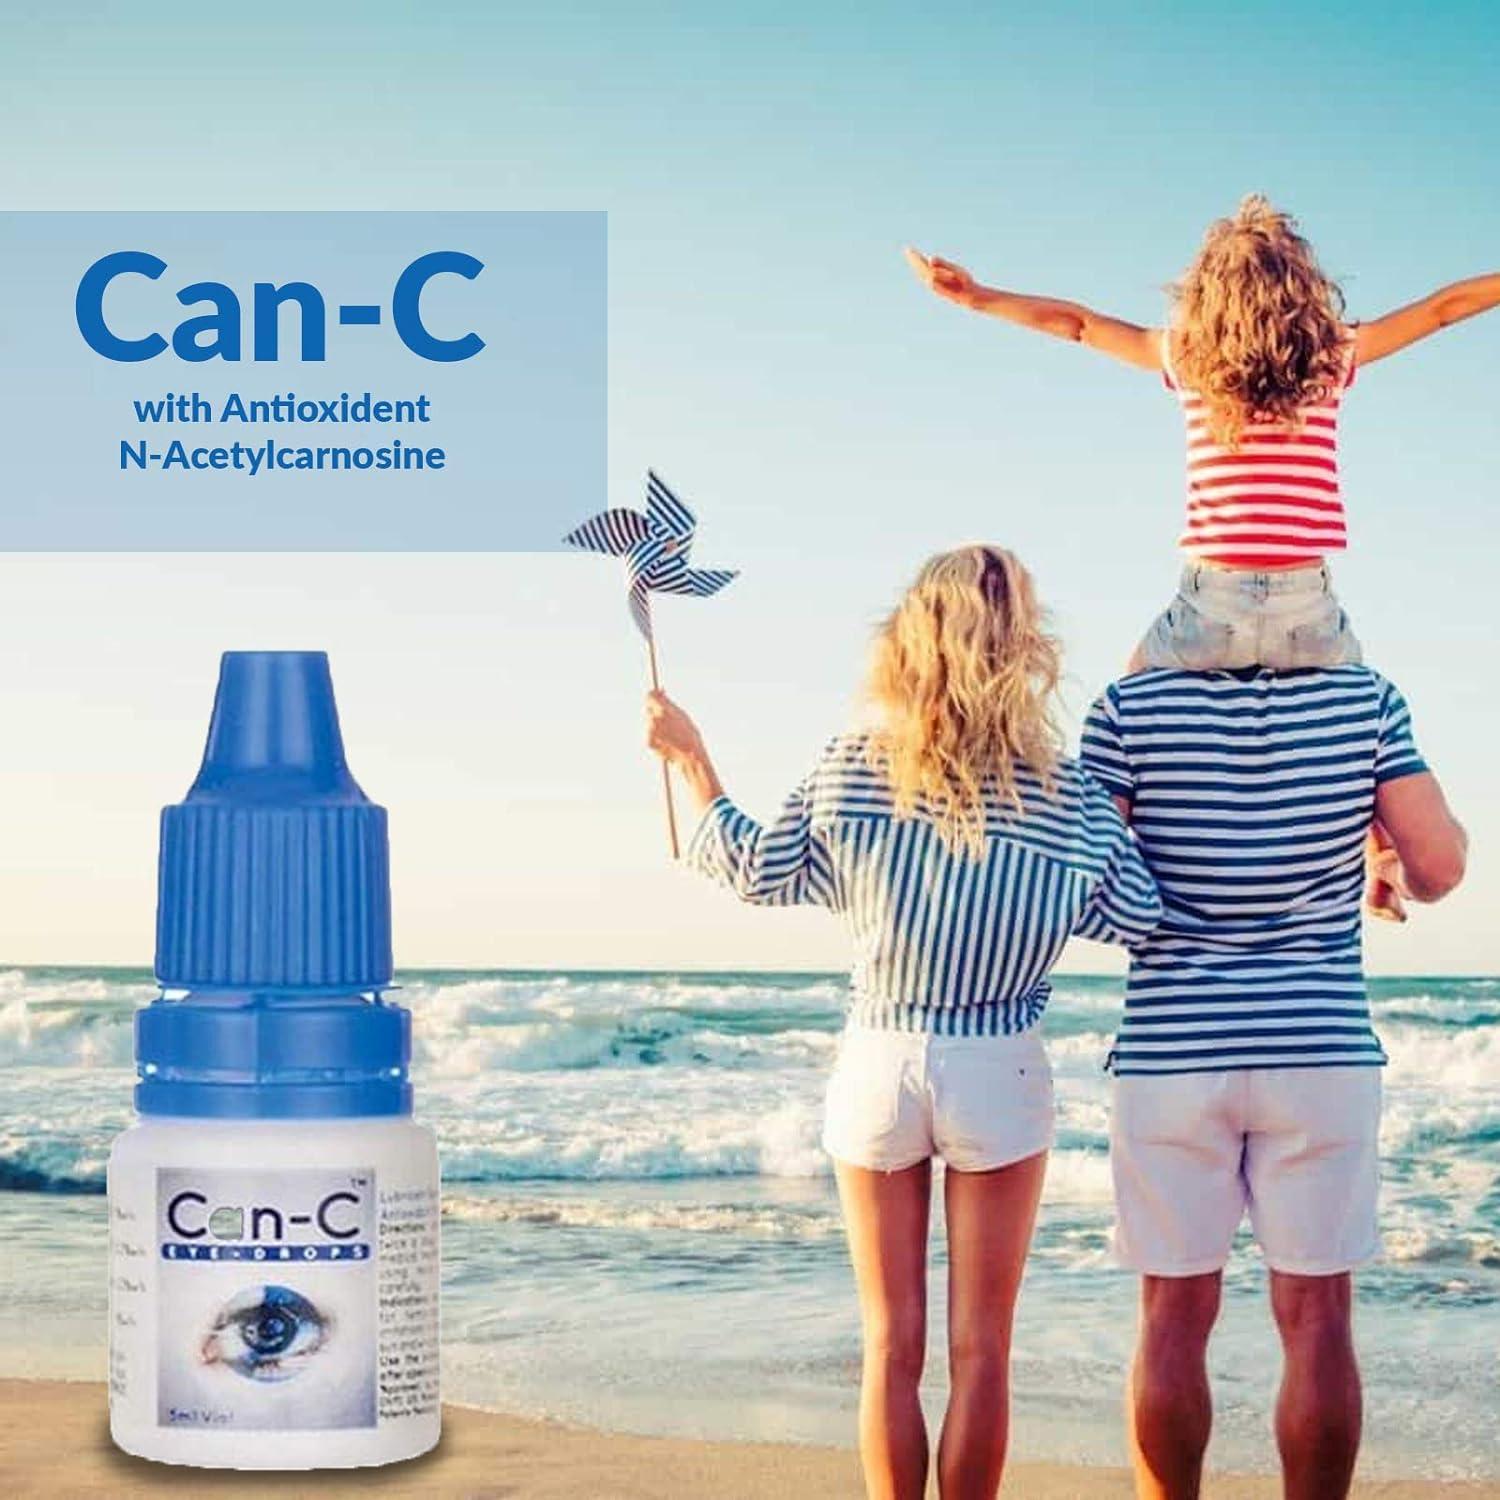 Can-c Eye-drops : : Health & Personal Care